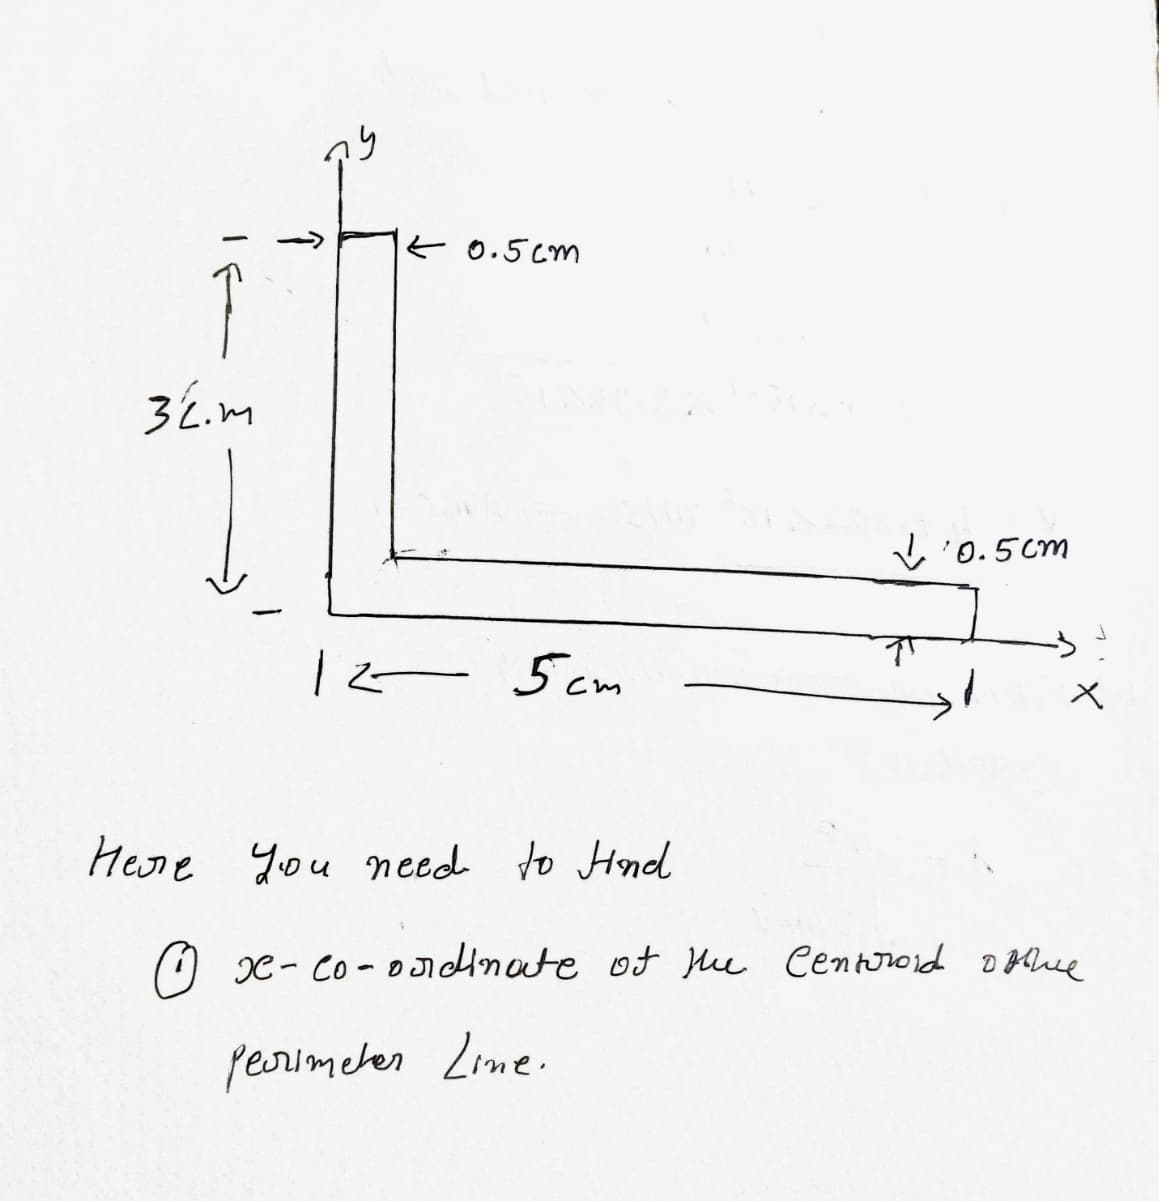 ما
32.m
пу
←0.5cm
12- 5cm
Here you need to Hind
↓0.5cm
Perimeter Line.
X
x-co-ordinate of the Centroid of the